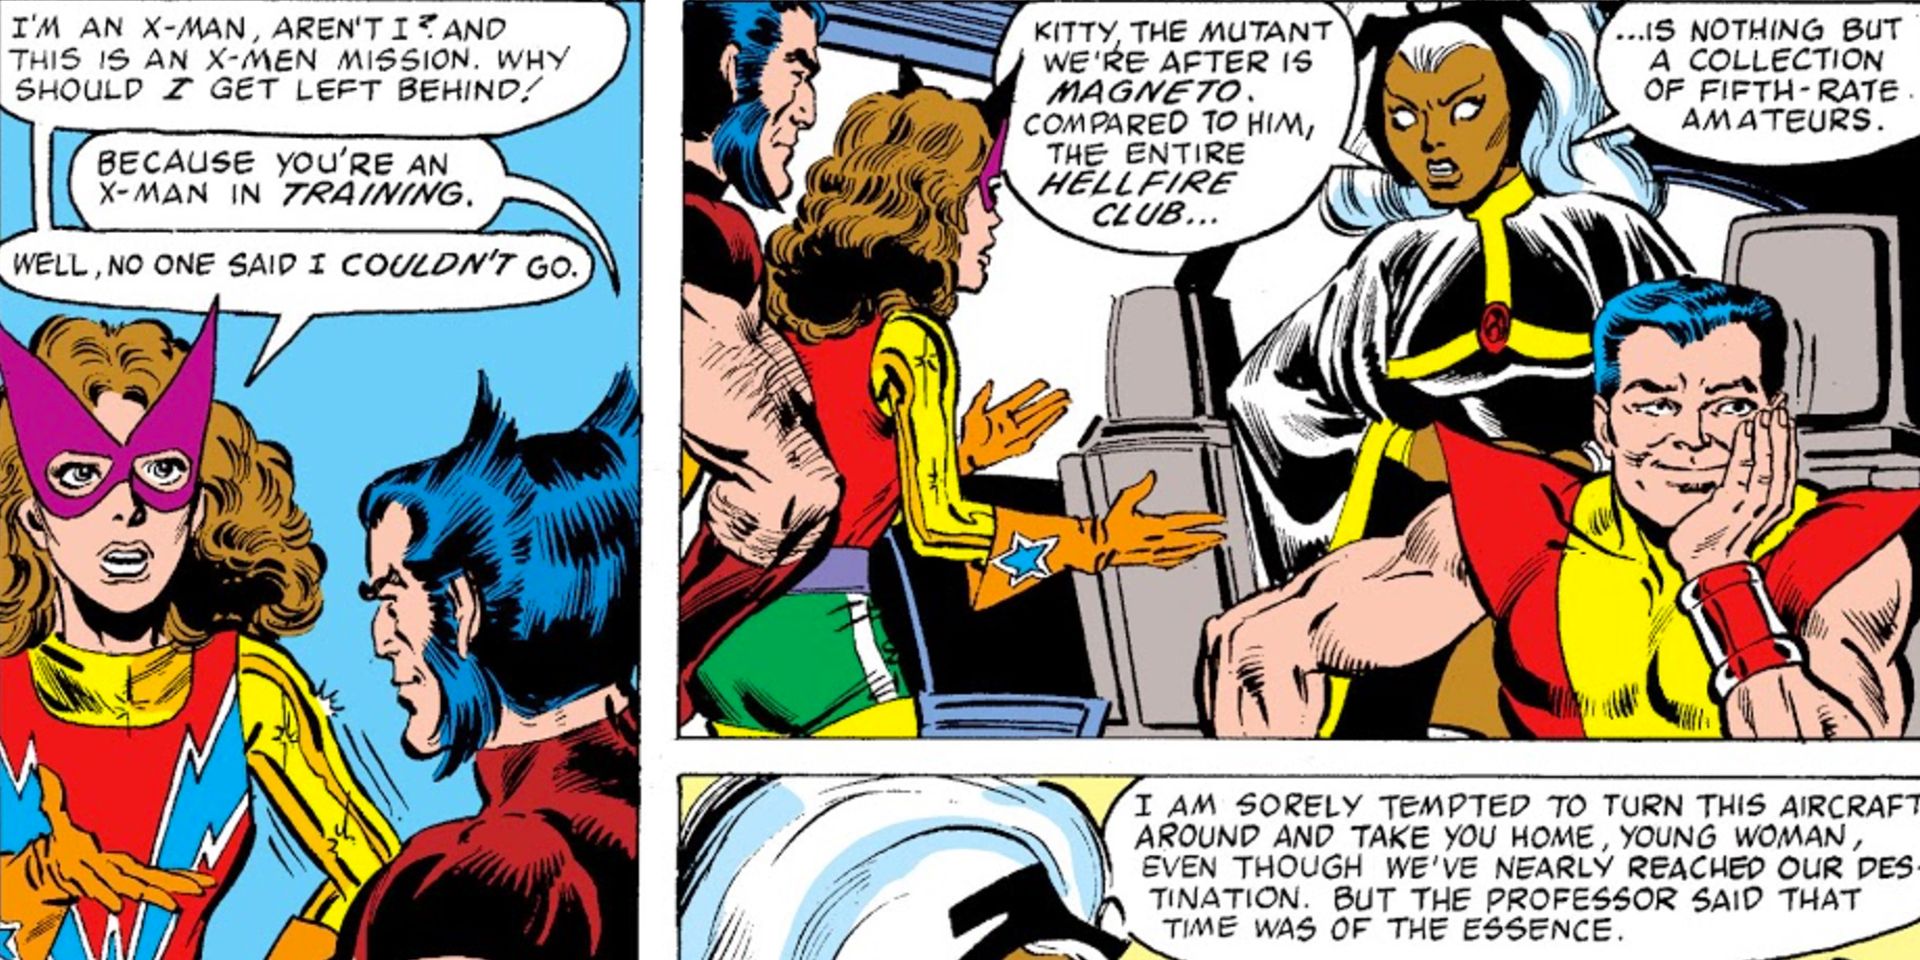 Kitty Pryde Sneaks Onto an X-Men Mission Against Magneto